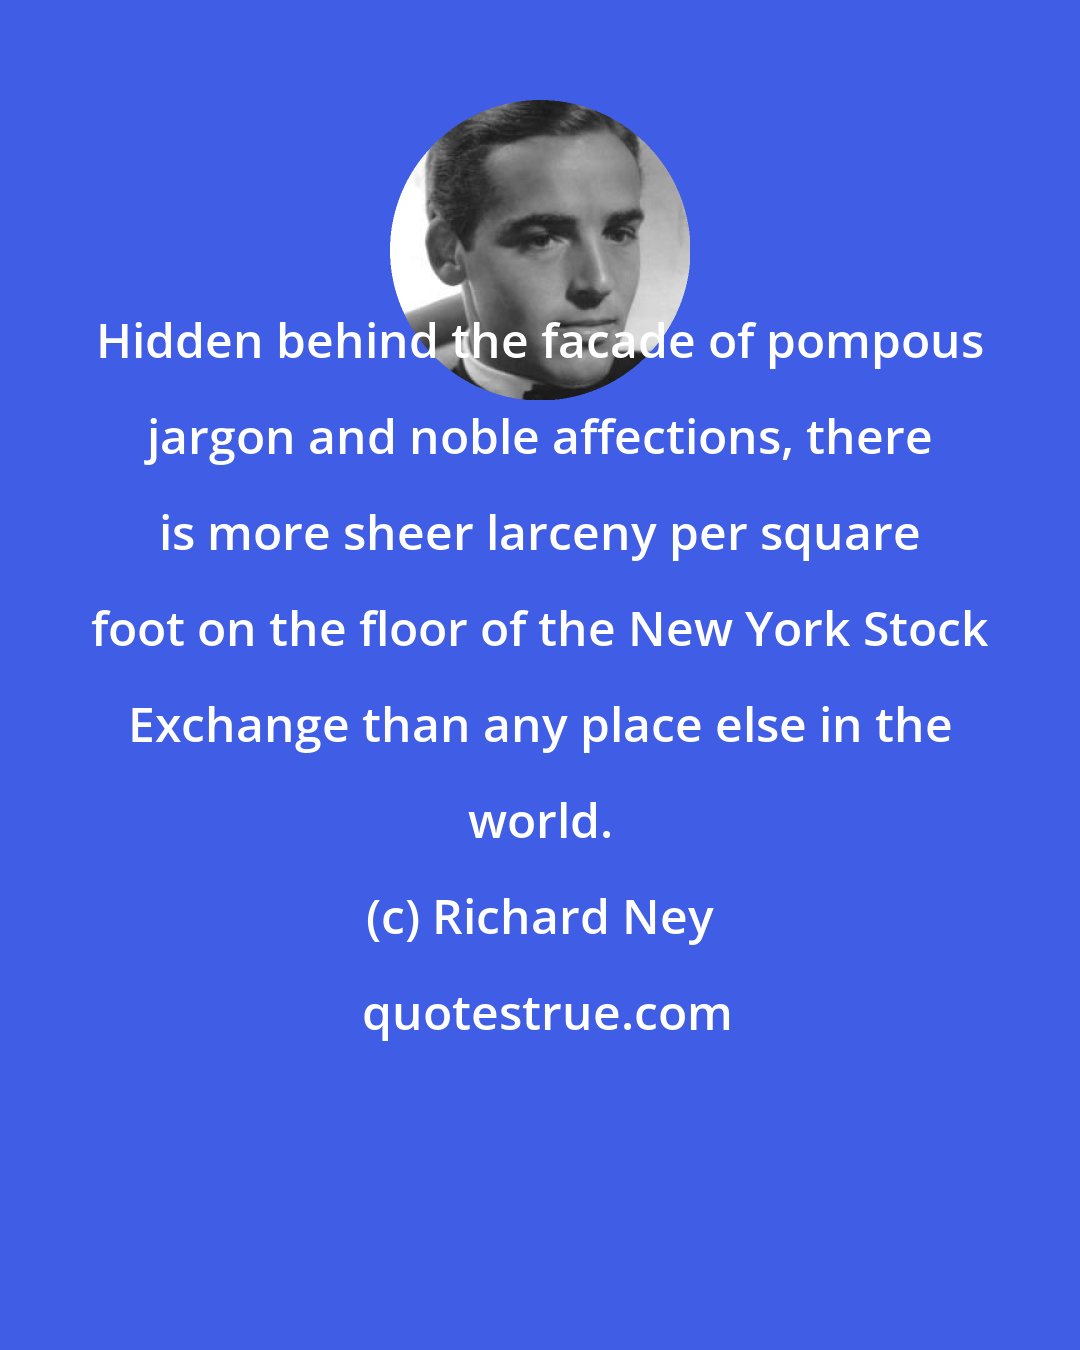 Richard Ney: Hidden behind the facade of pompous jargon and noble affections, there is more sheer larceny per square foot on the floor of the New York Stock Exchange than any place else in the world.